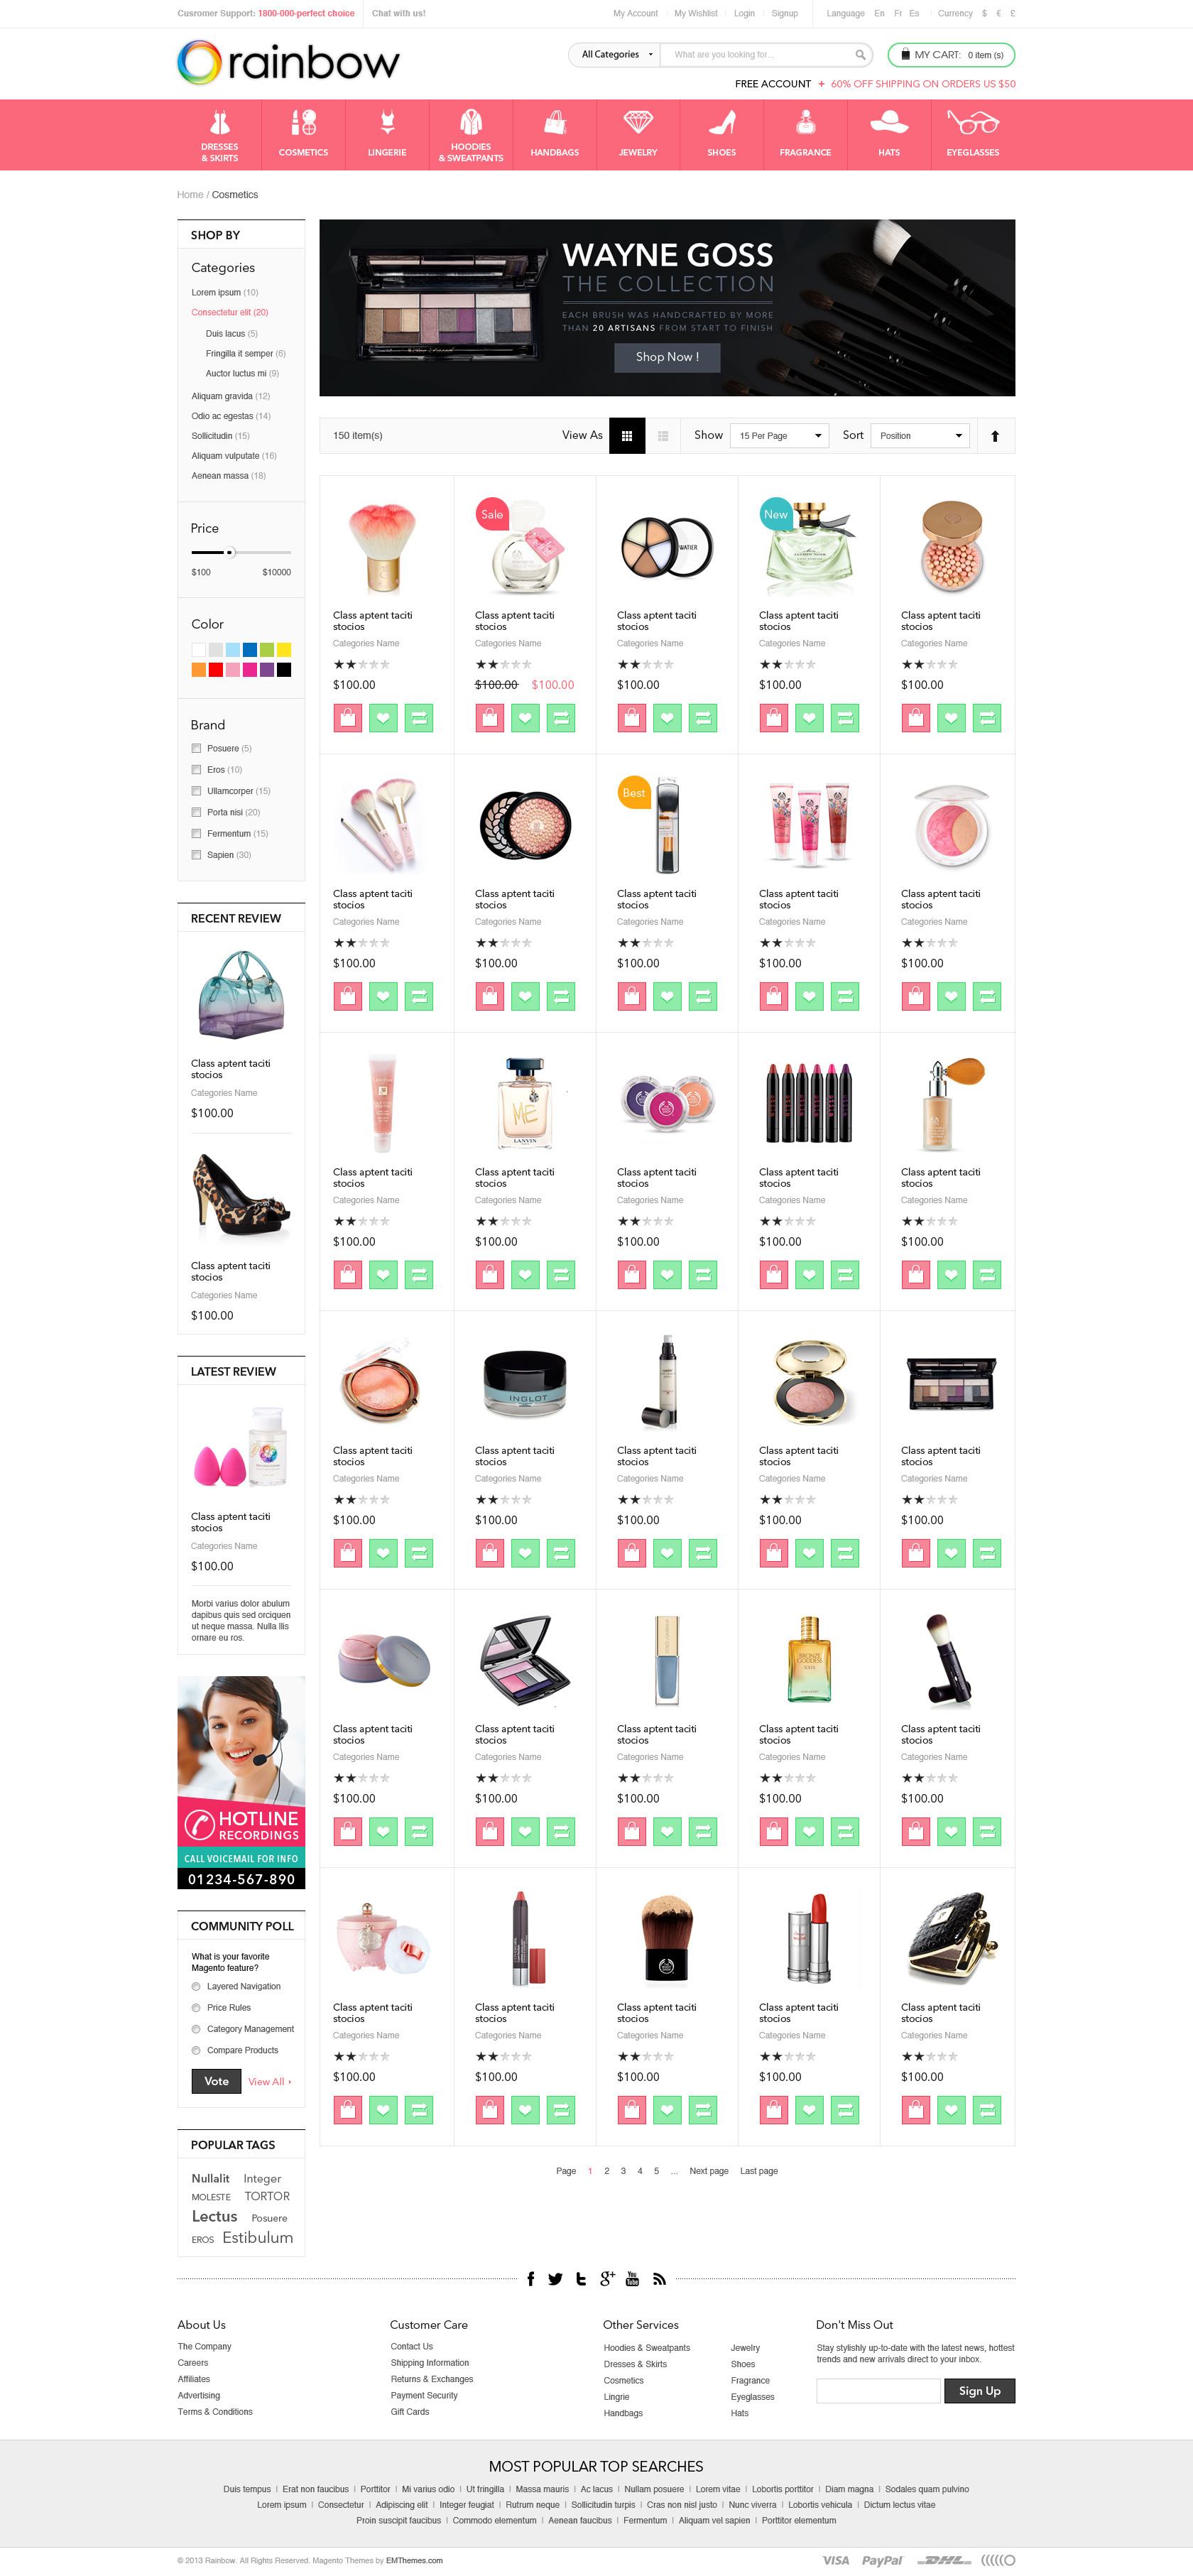 Product list page 1